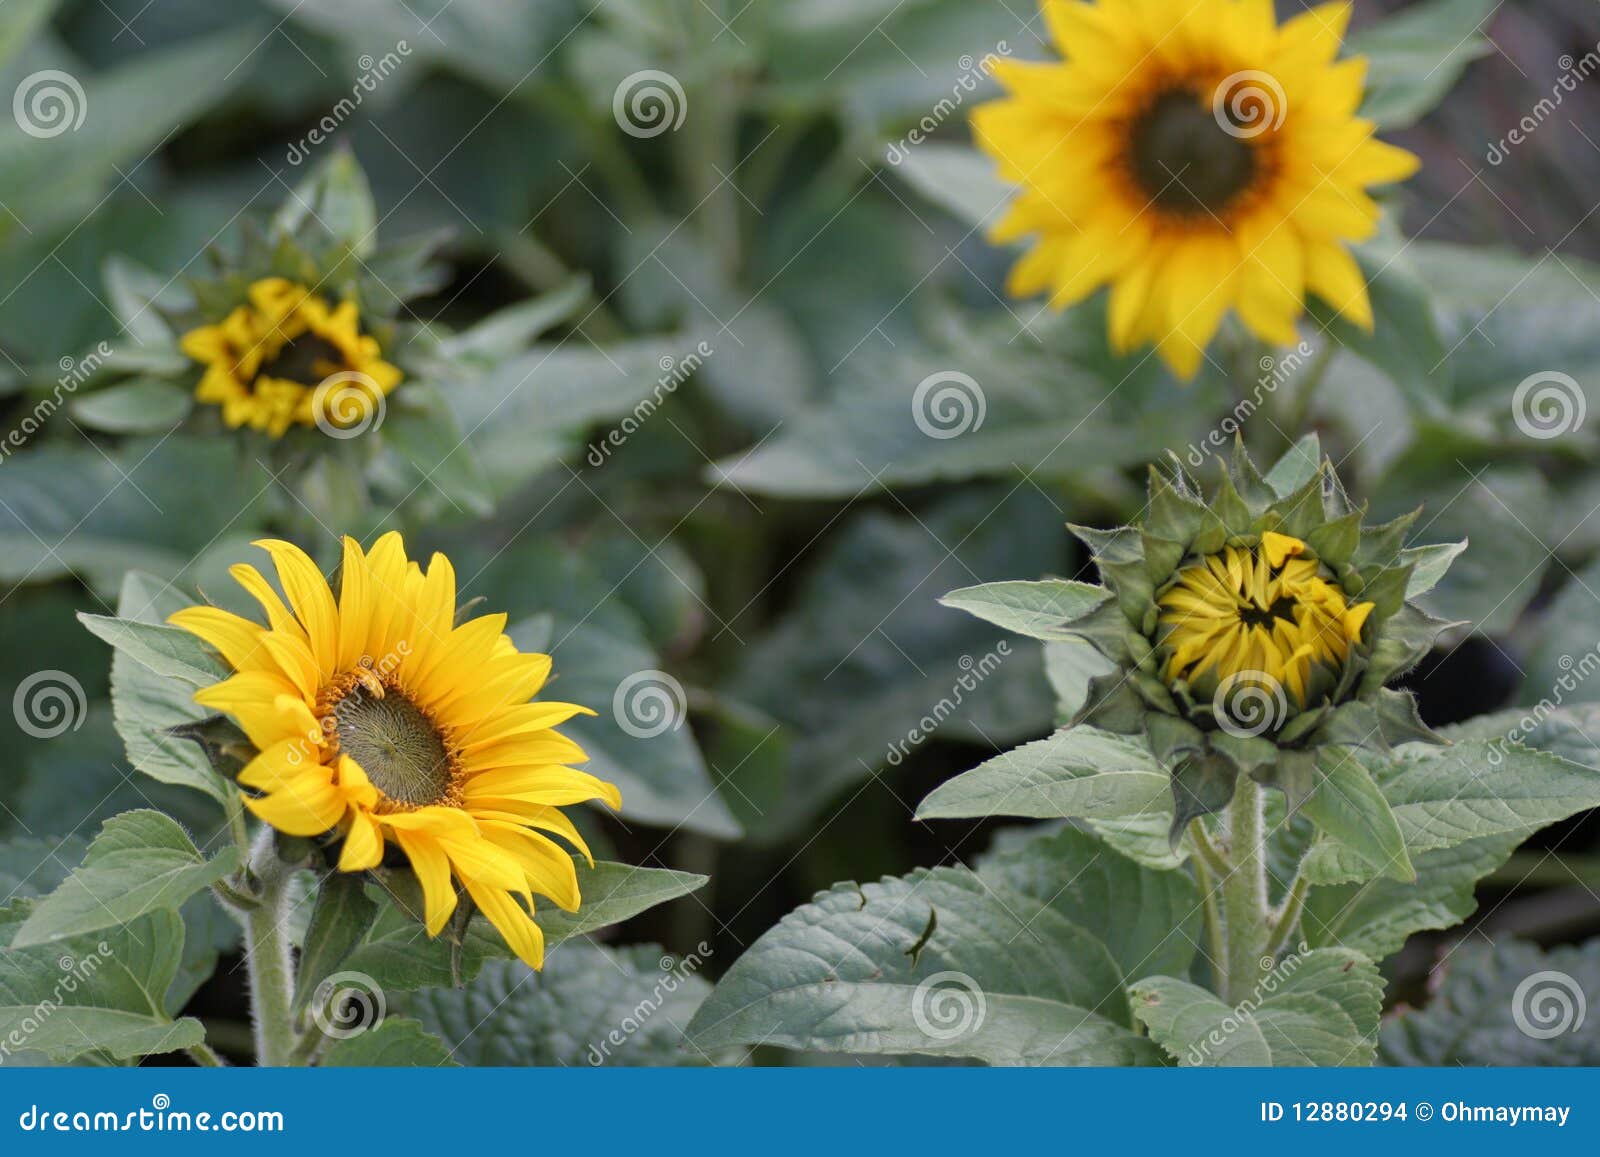 Sunflowers in Different Stages of Growth Stock Photo - Image of garden ...